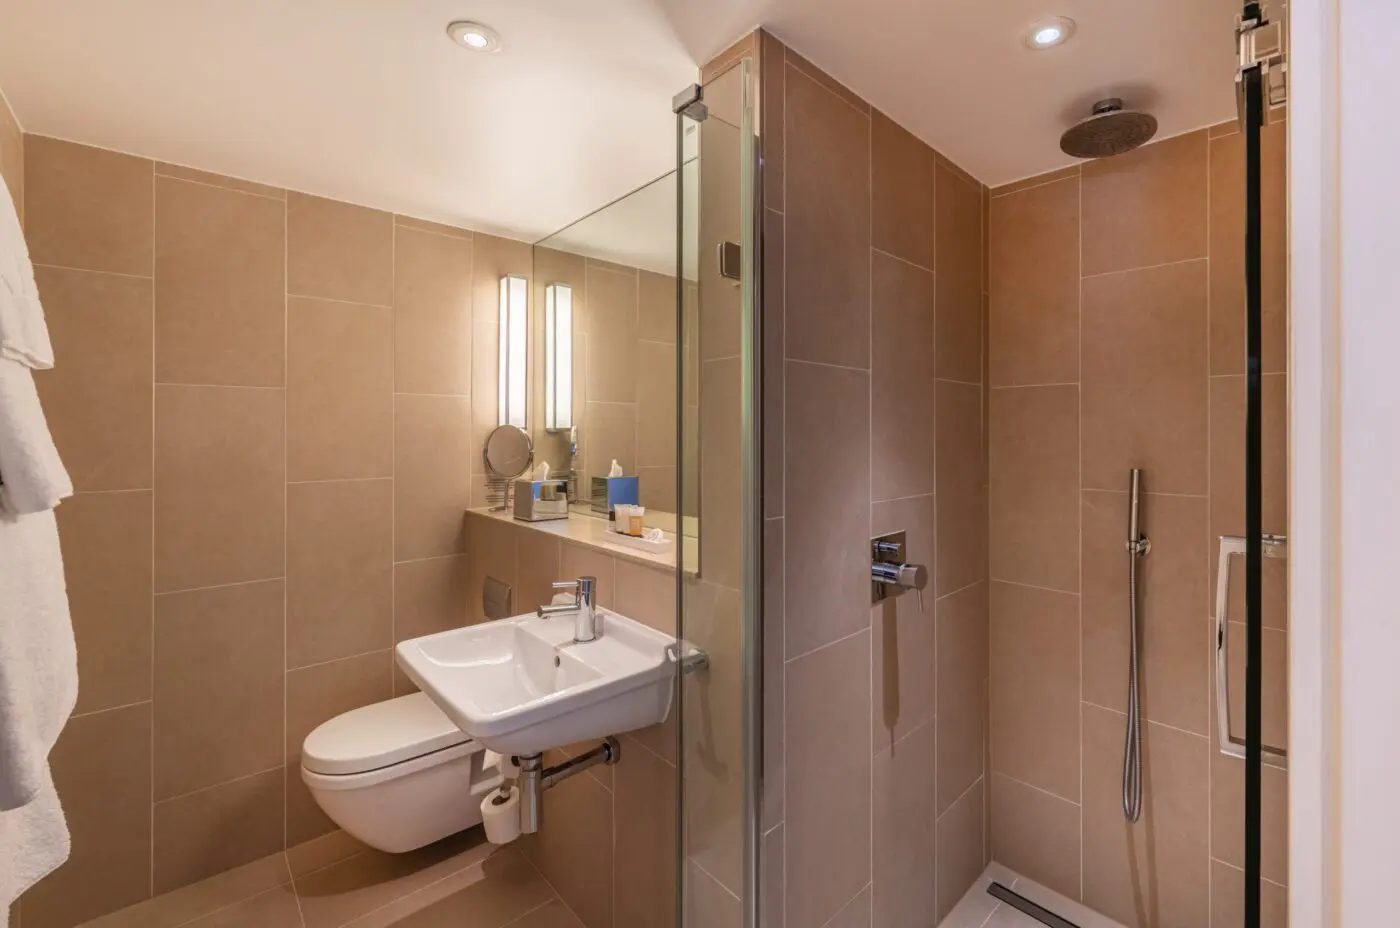 Small double bathroom with a walk-in shower, located in Victoria.